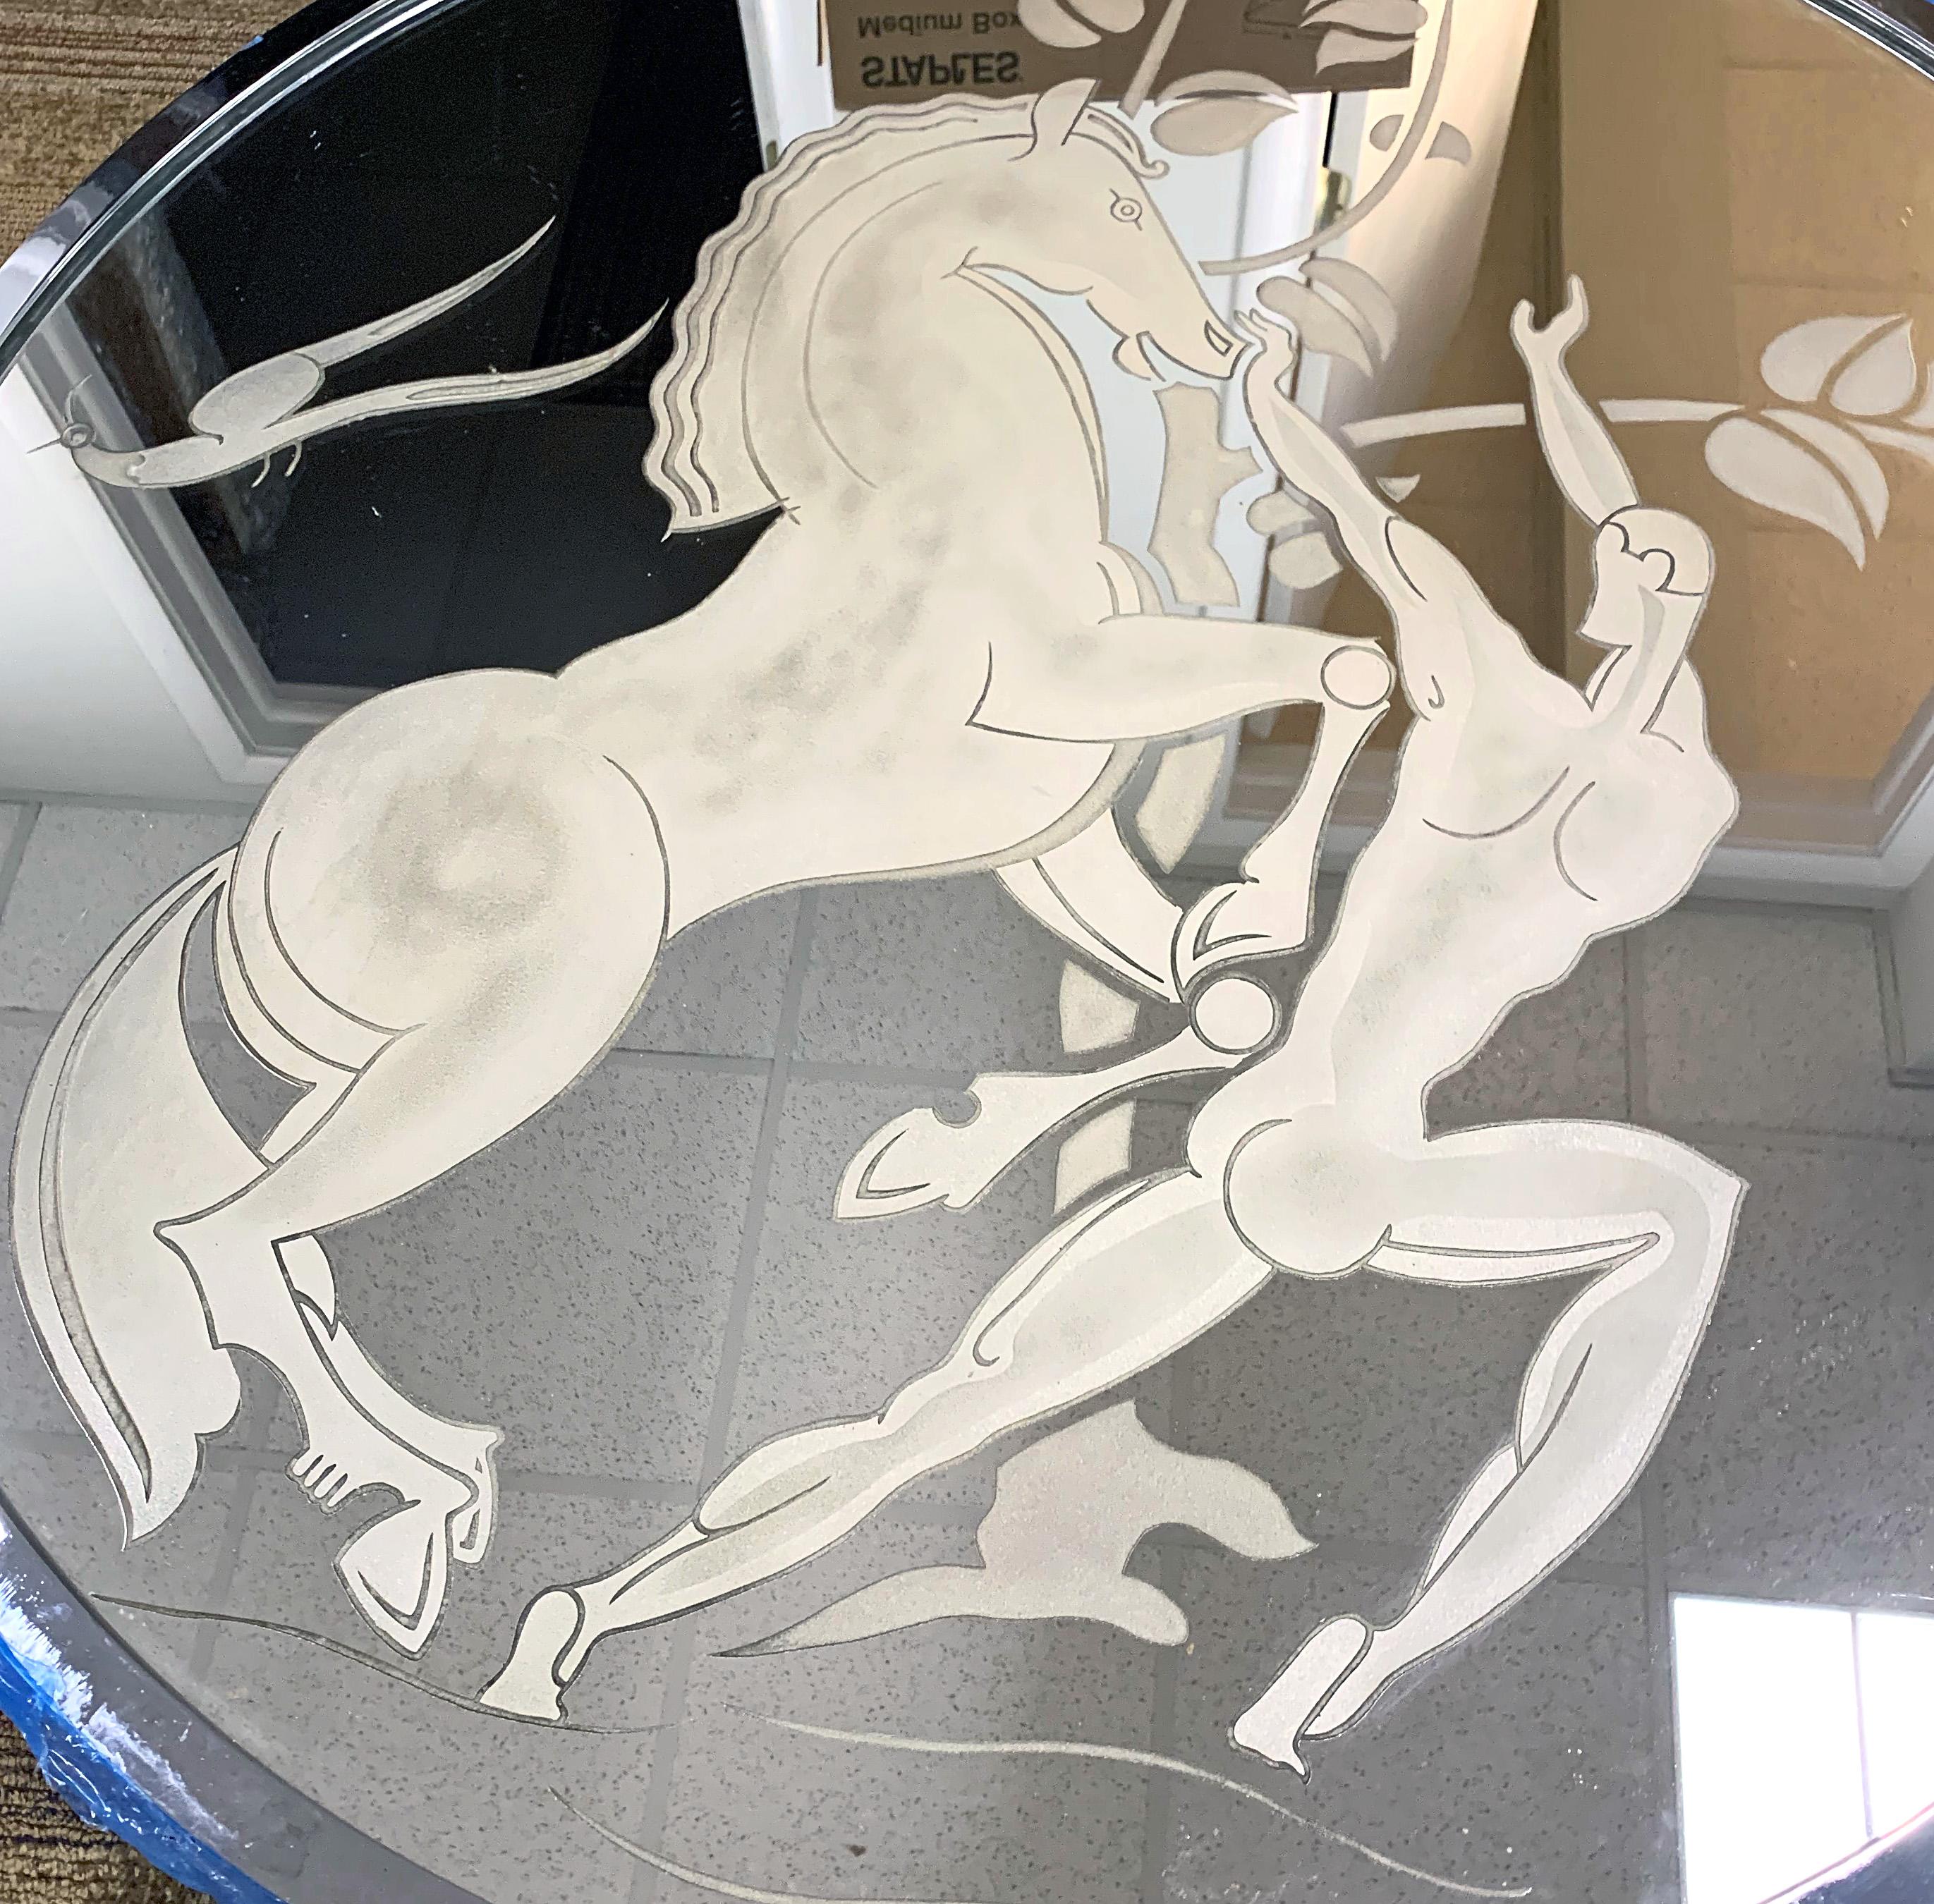 The only example we have ever seen, this large and impressive Art Deco Mirror depicts a nude male figure bounding joyfully with his horse, a leafy tree in the background and birds flying overhead. The round shape of the mirror and the mythological